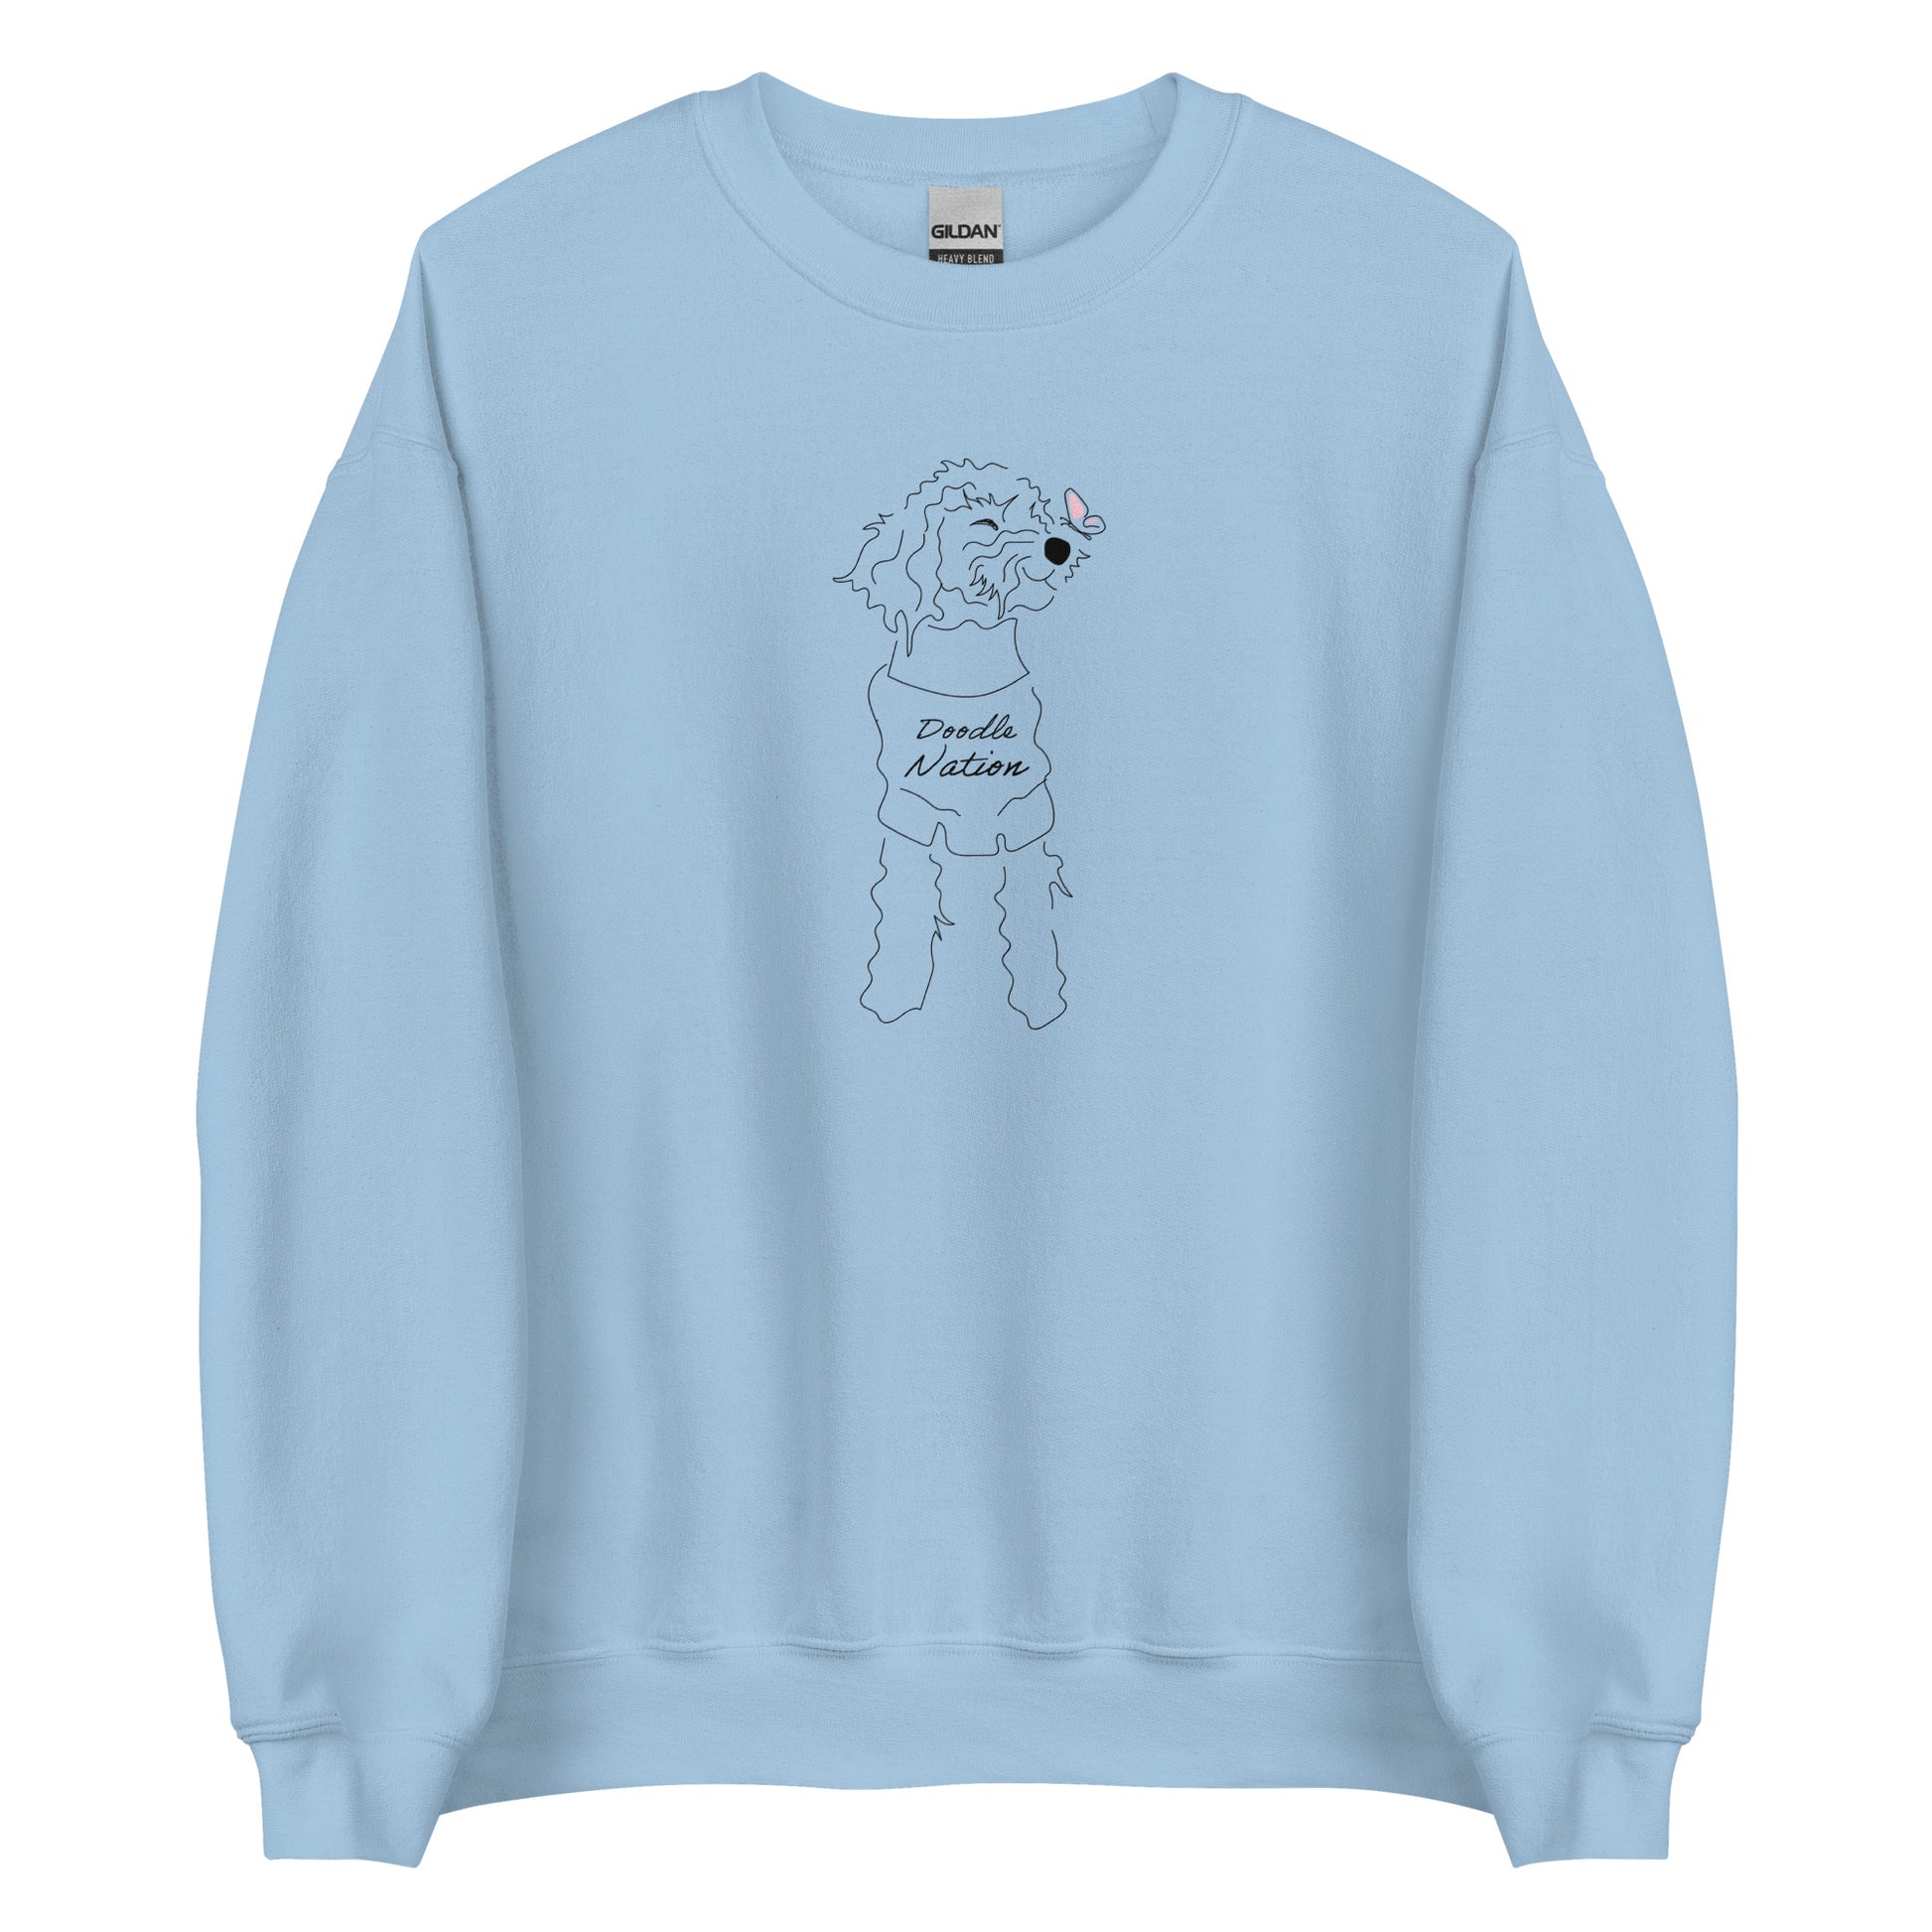 Goldendoodle crew neck sweatshirt with Goldendoodle dog face and words "Doodle Nation" in light blue color